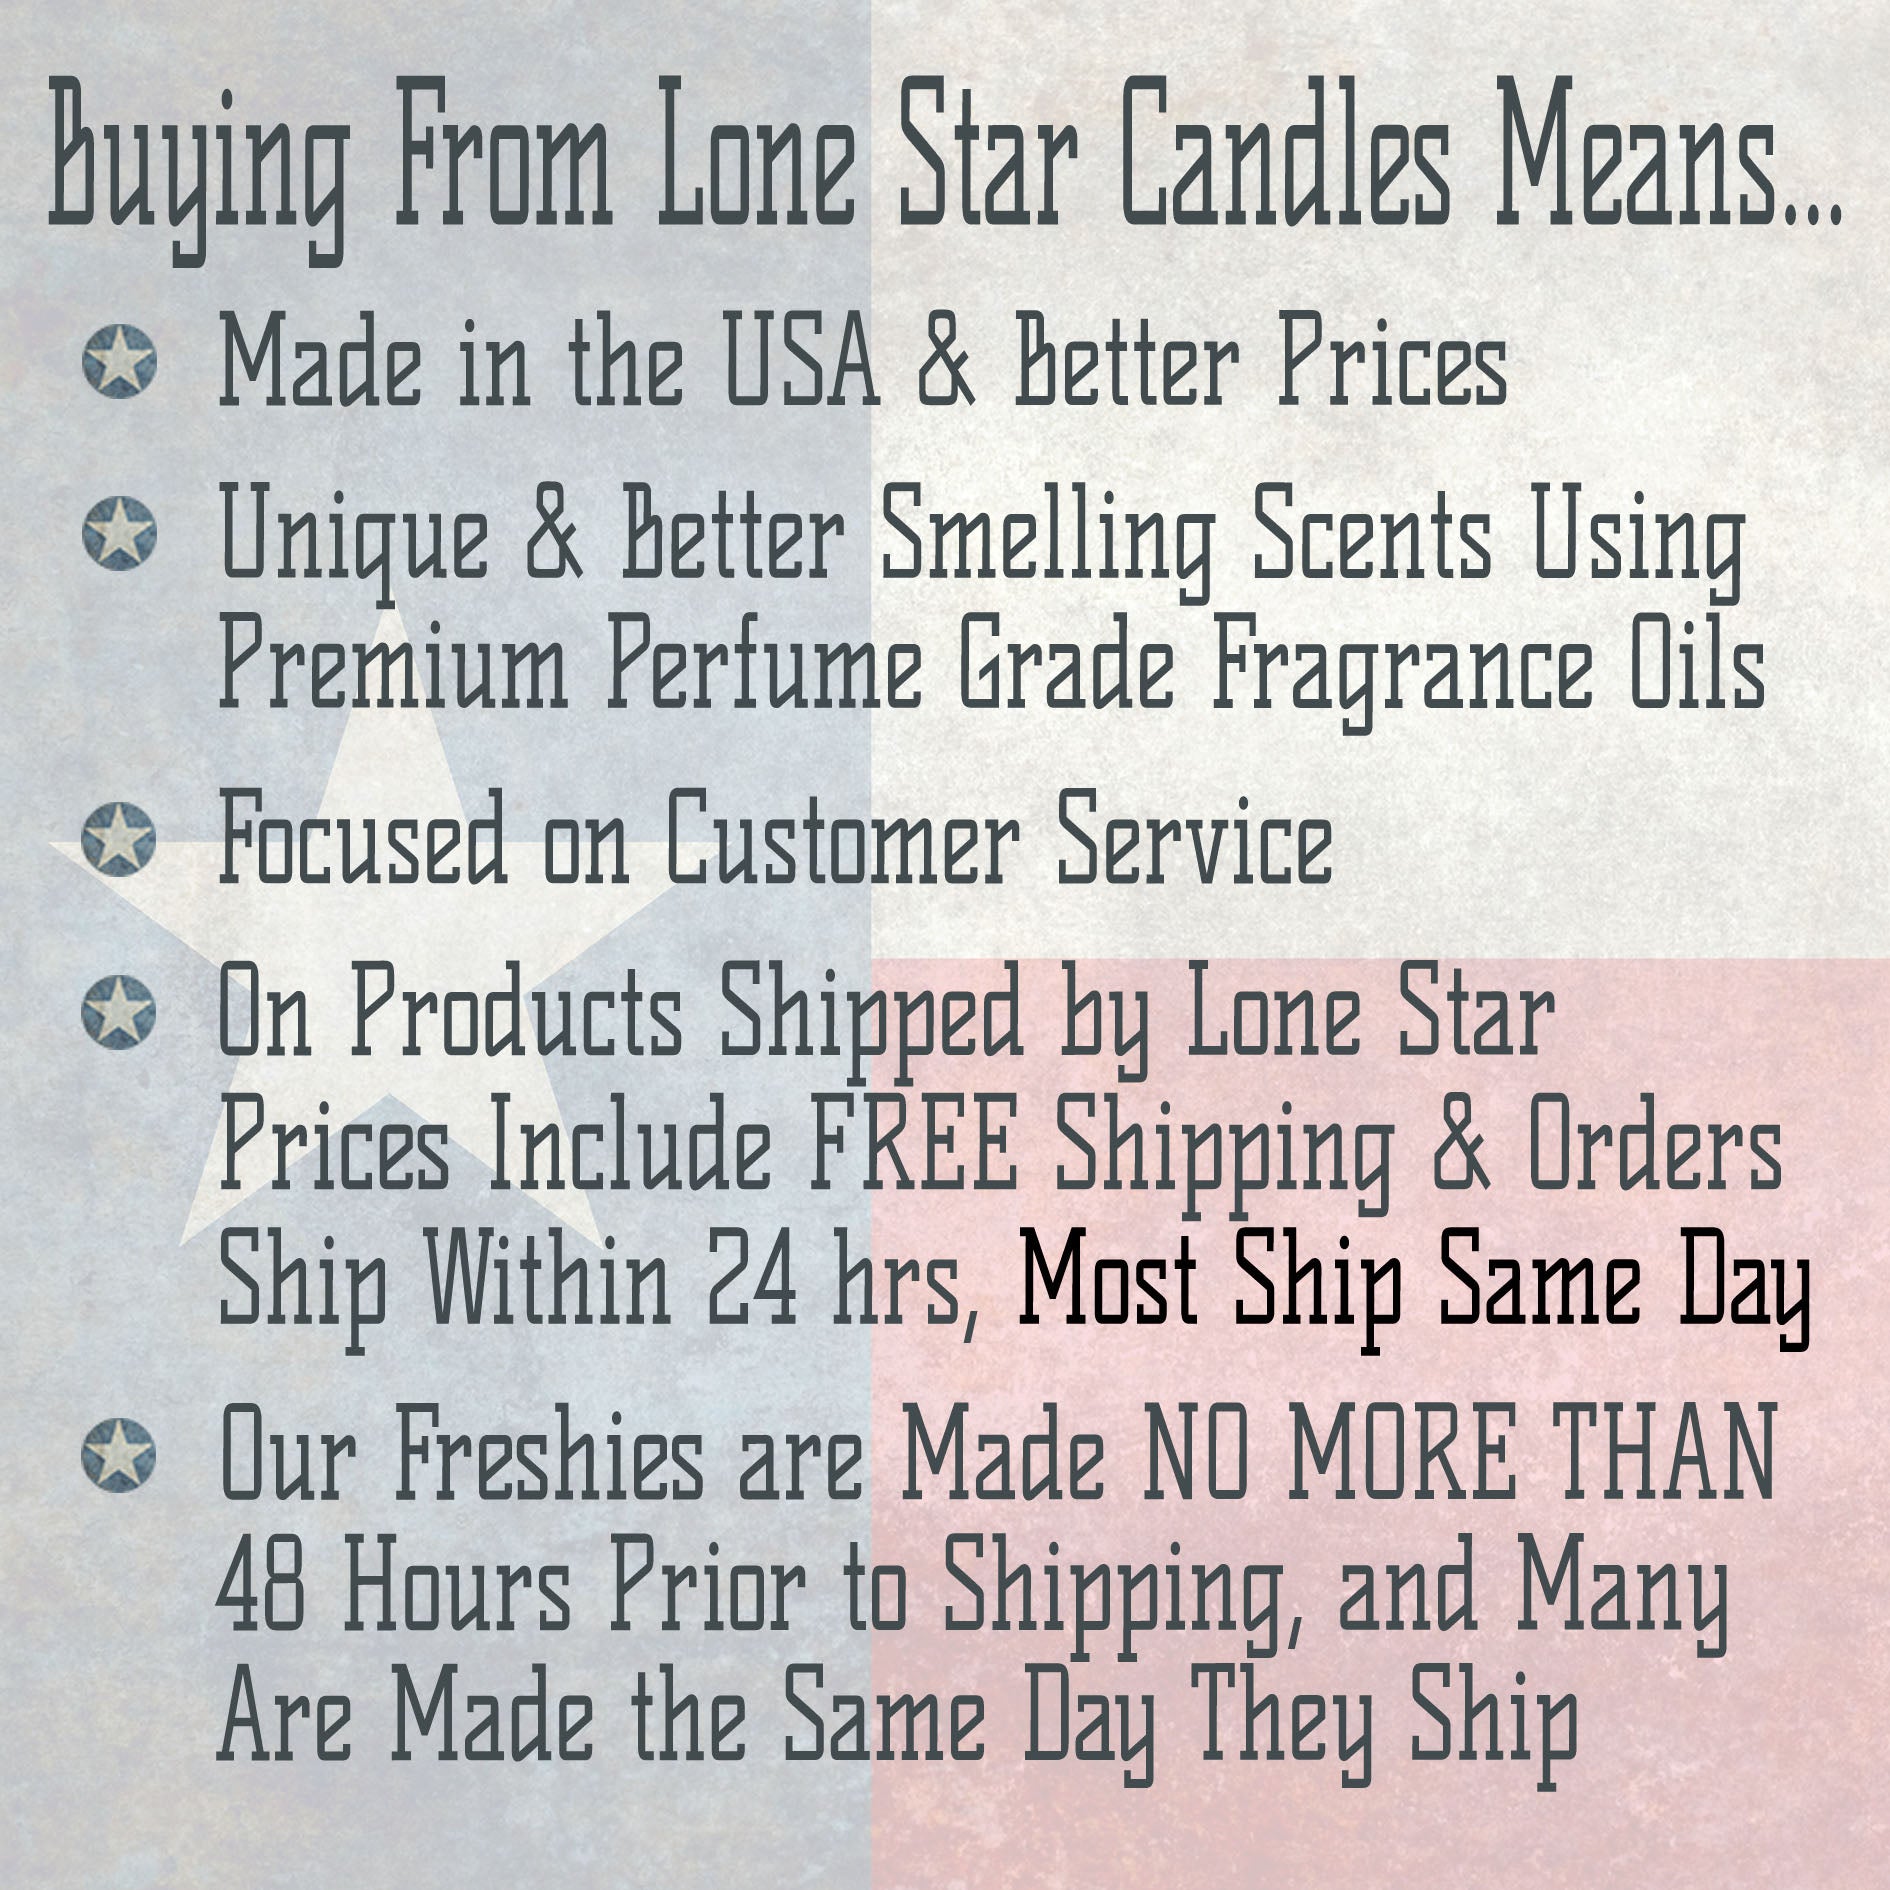 Cranberries & Sandalwood, Lone Star Candles & More's Premium Strongly Scented Freshies, A Delightful Mix of Spiced Cranberry, & Sandalwood, Car & Air Freshener, USA Made in TX, Black TX Cowhide 1-Pack